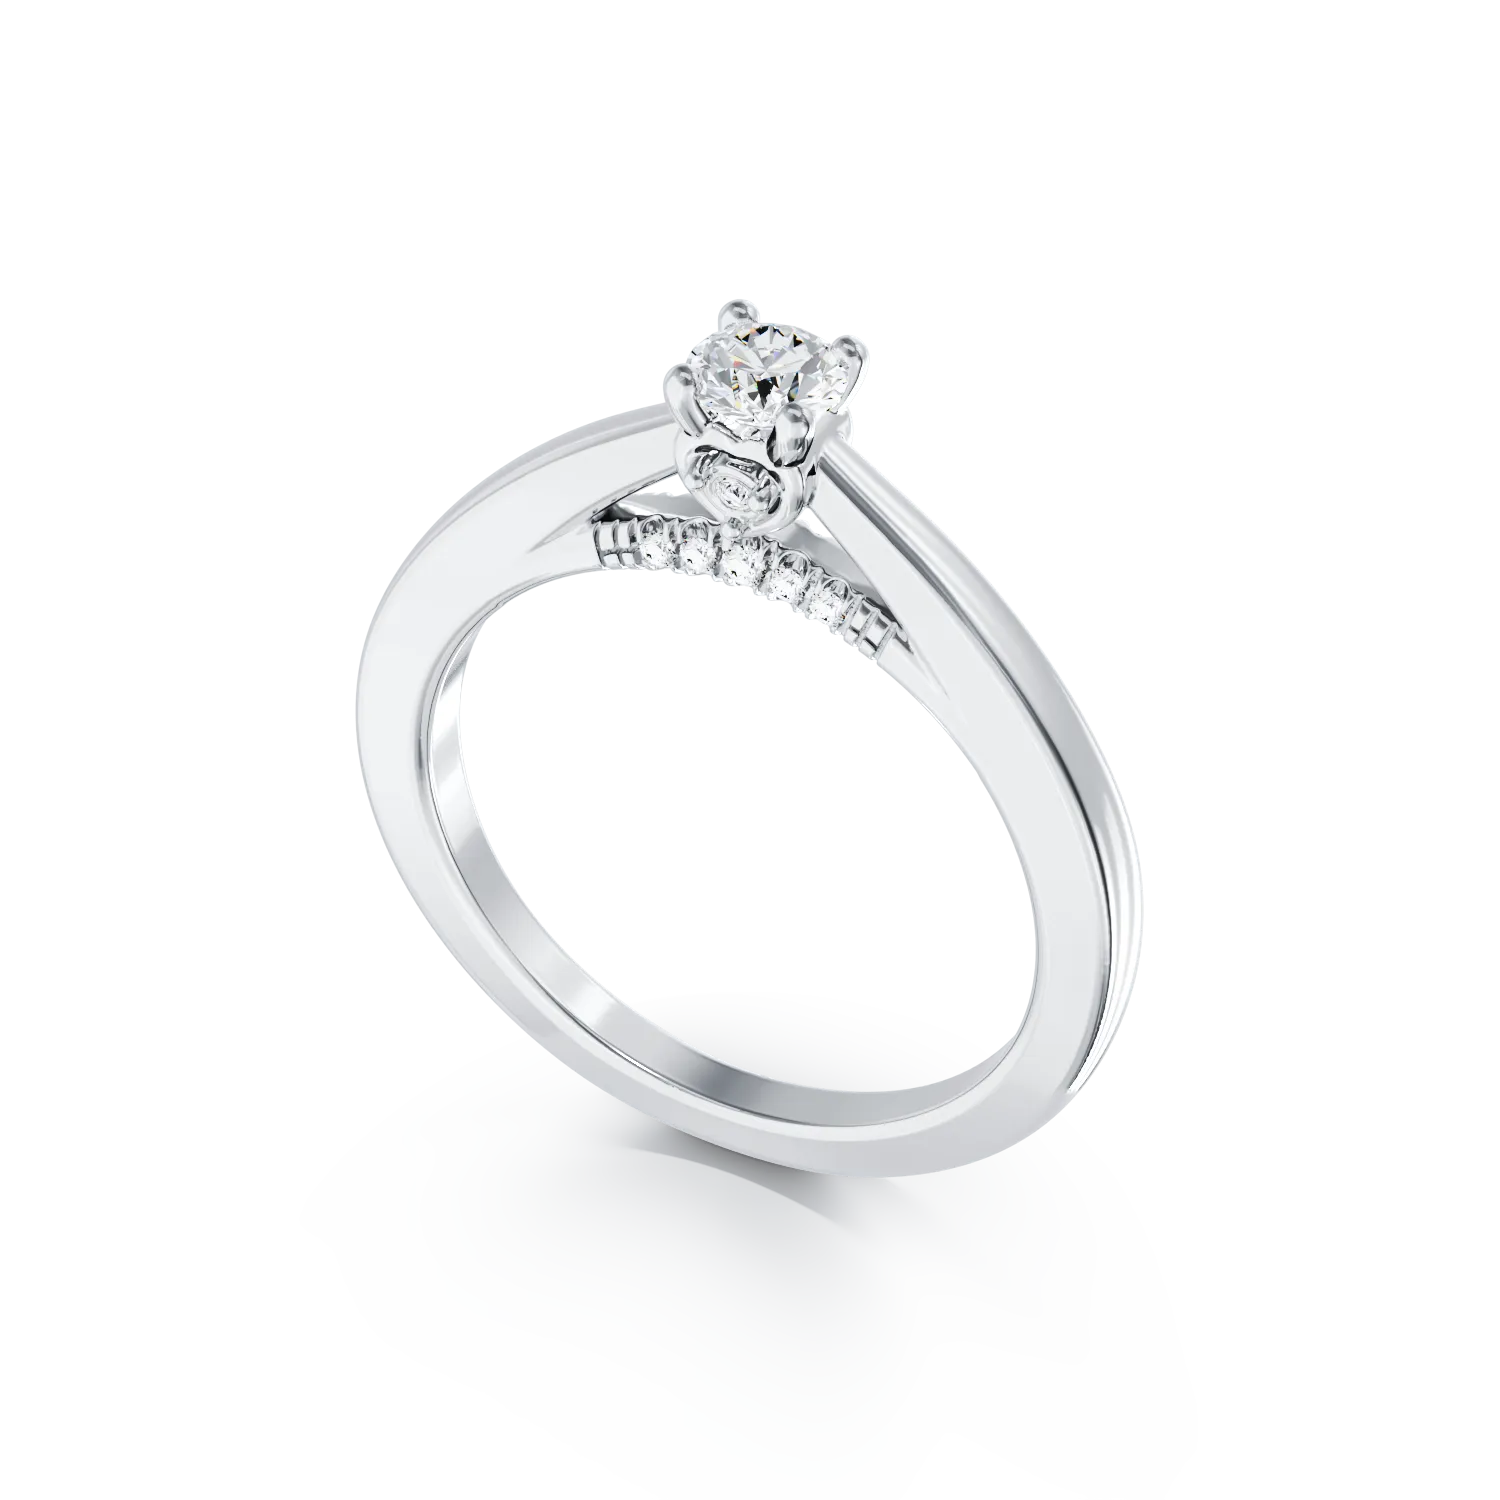 18K white gold engagement ring with 0.3ct diamond and 0.06ct diamonds